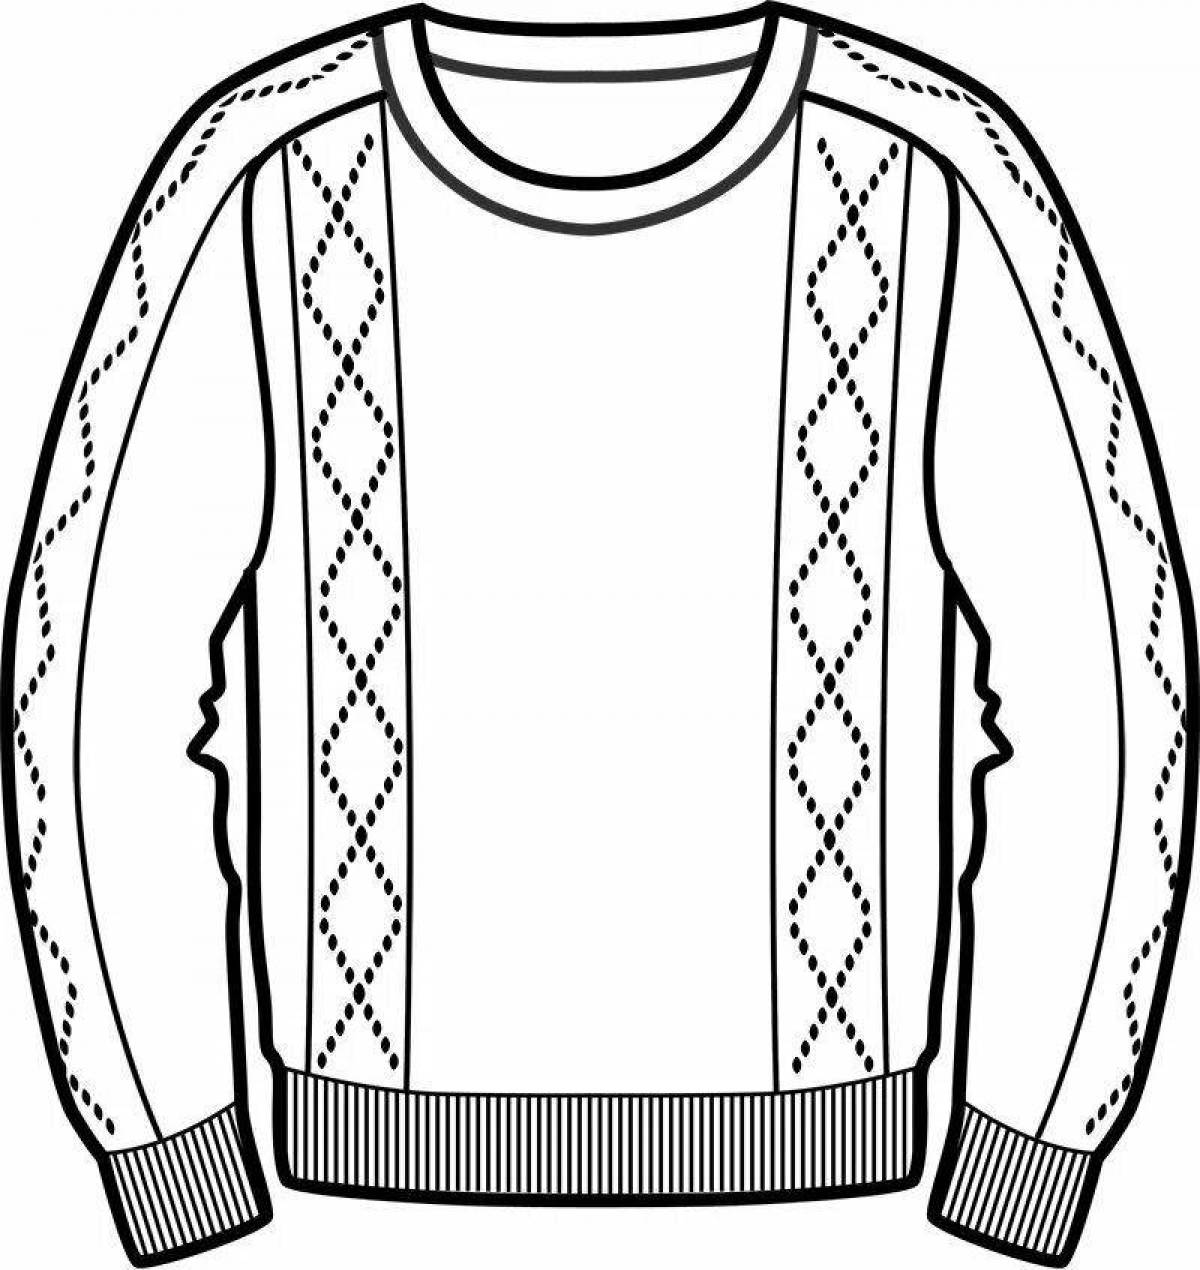 Coloring page joyful sweater for children 4-5 years old